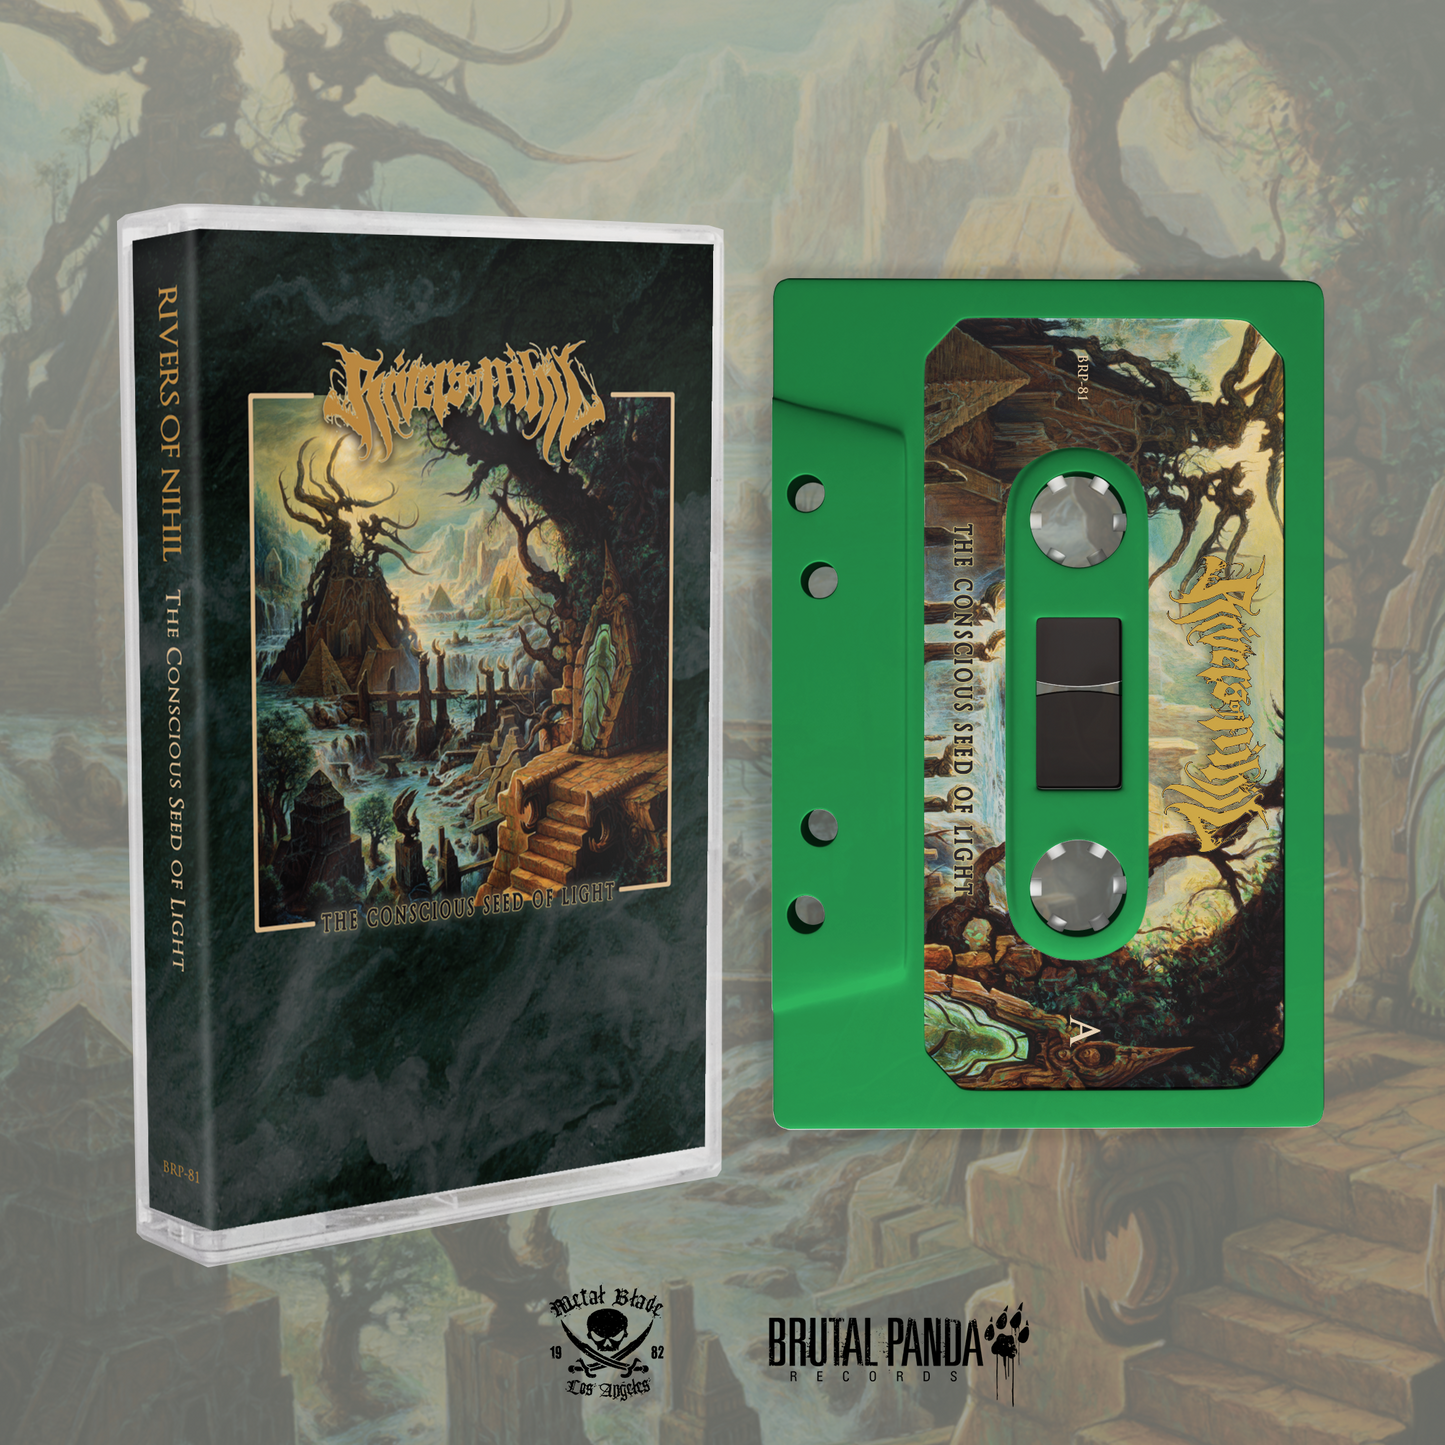 RIVERS OF NIHIL - The Conscious Seed Of Light - Cassette Tape